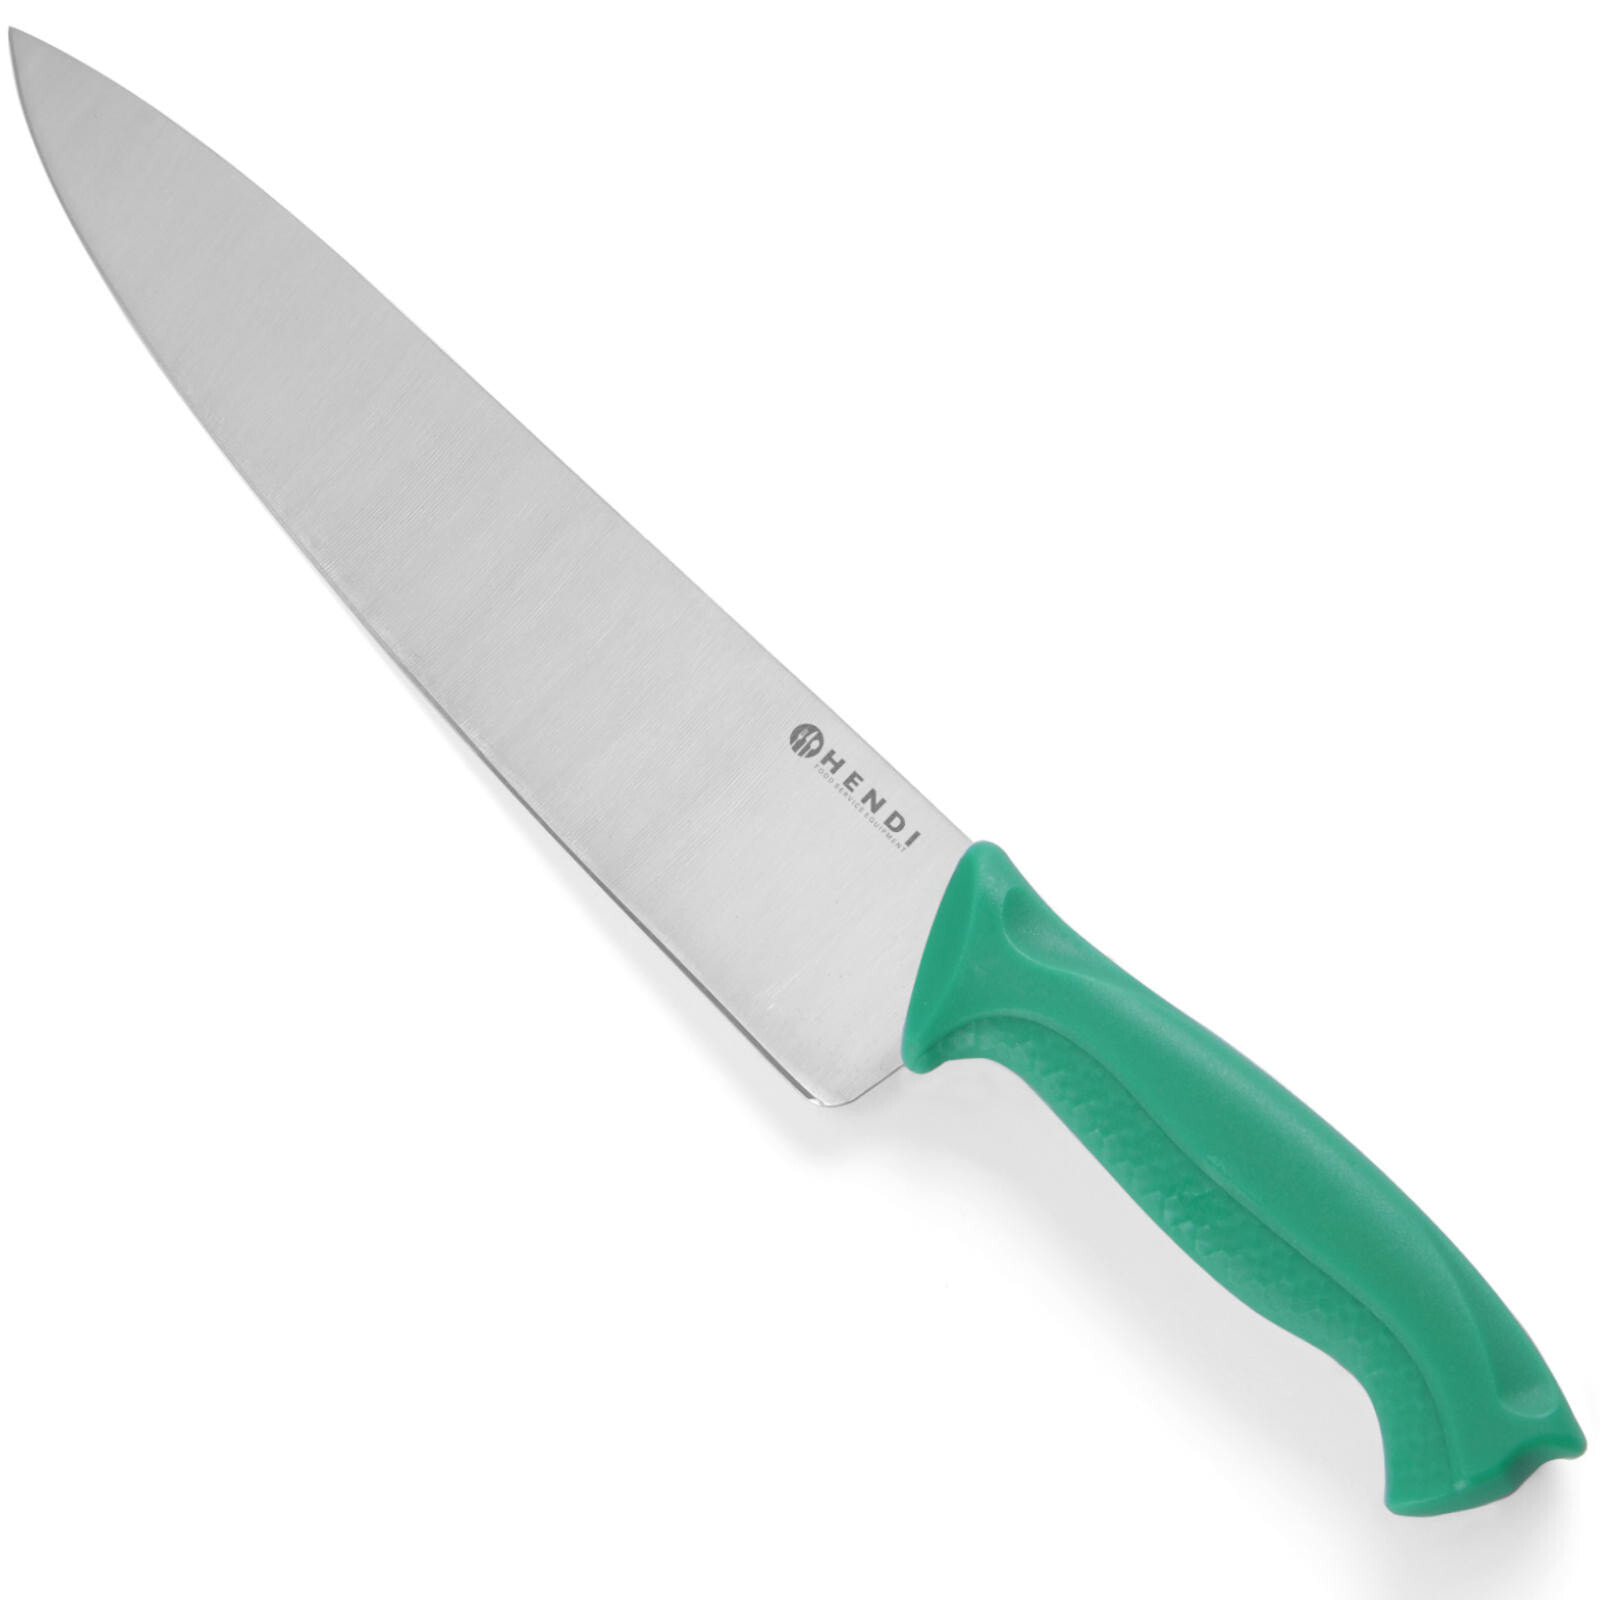 Vegetable and fruit chef's knife HACCP 385mm - green - HENDI 842713